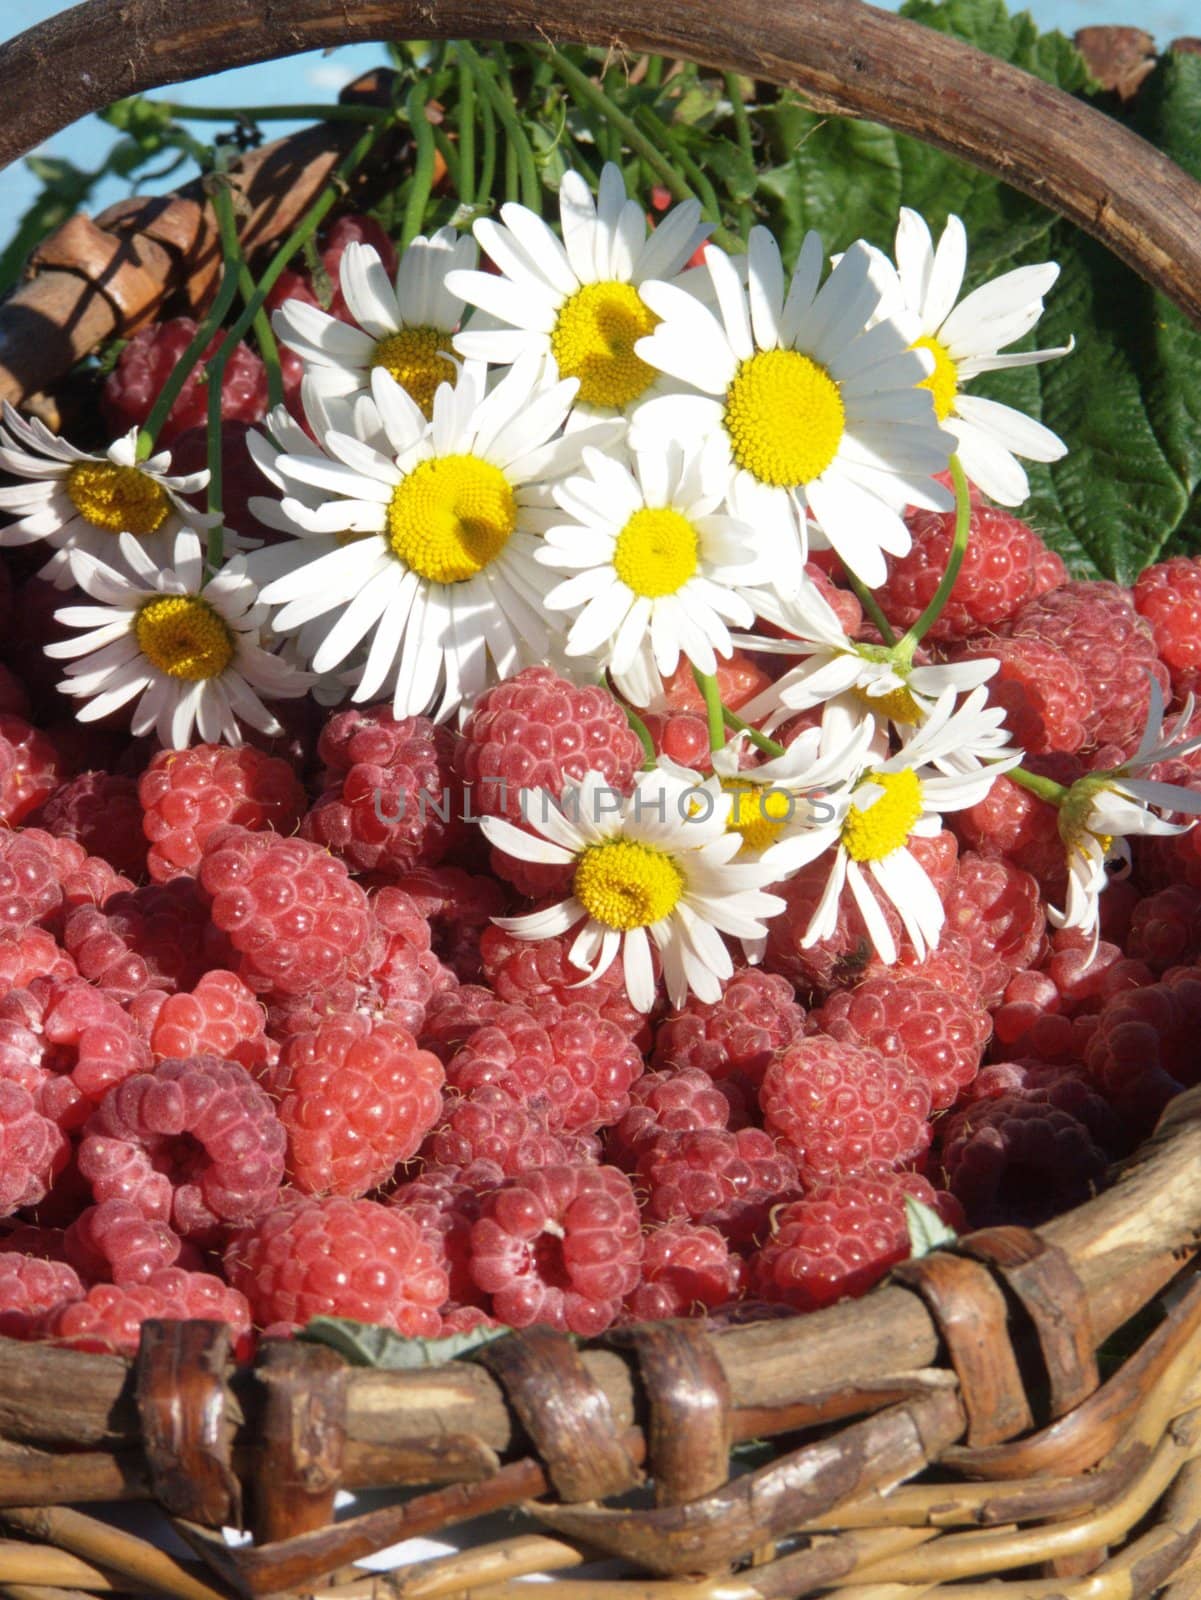 The image of a bouquet of camomiles on a raspberry in the big basket